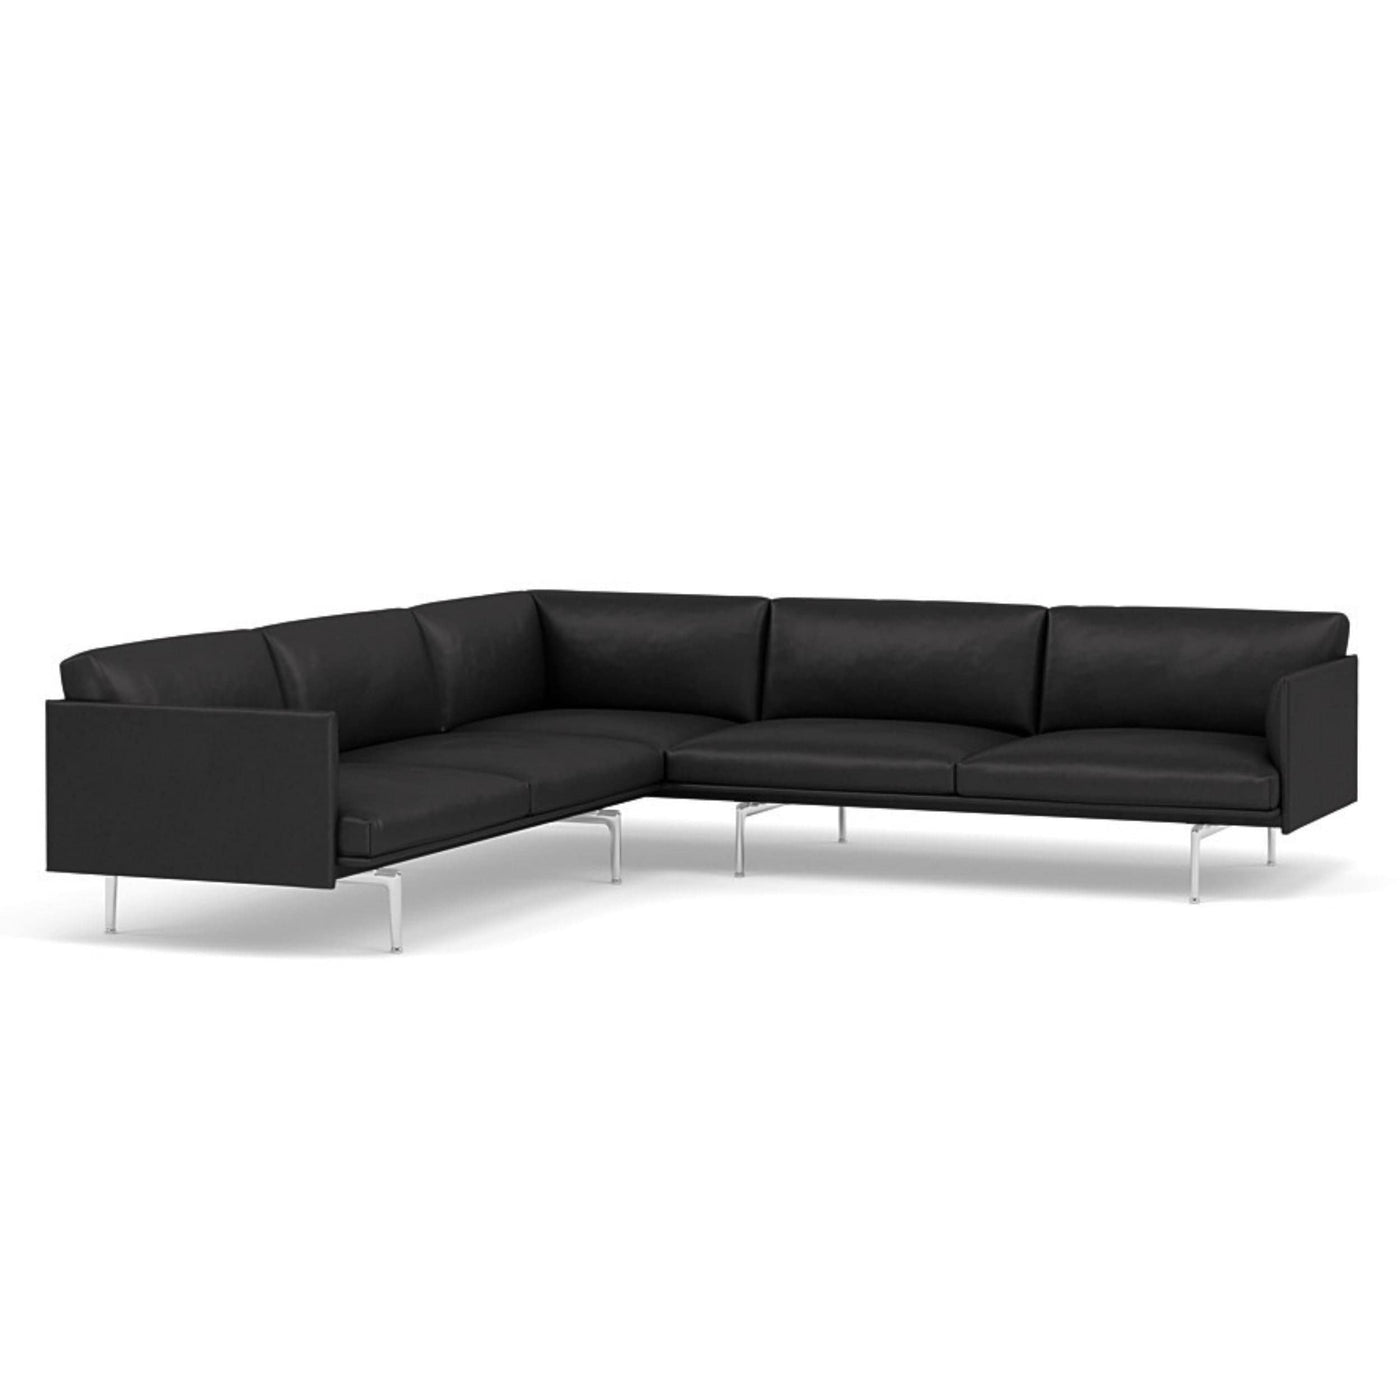 muuto outline corner sofa in black refine leather fabric and polished aluminium legs. Made to order from someday designs. #colour_black-refine-leather